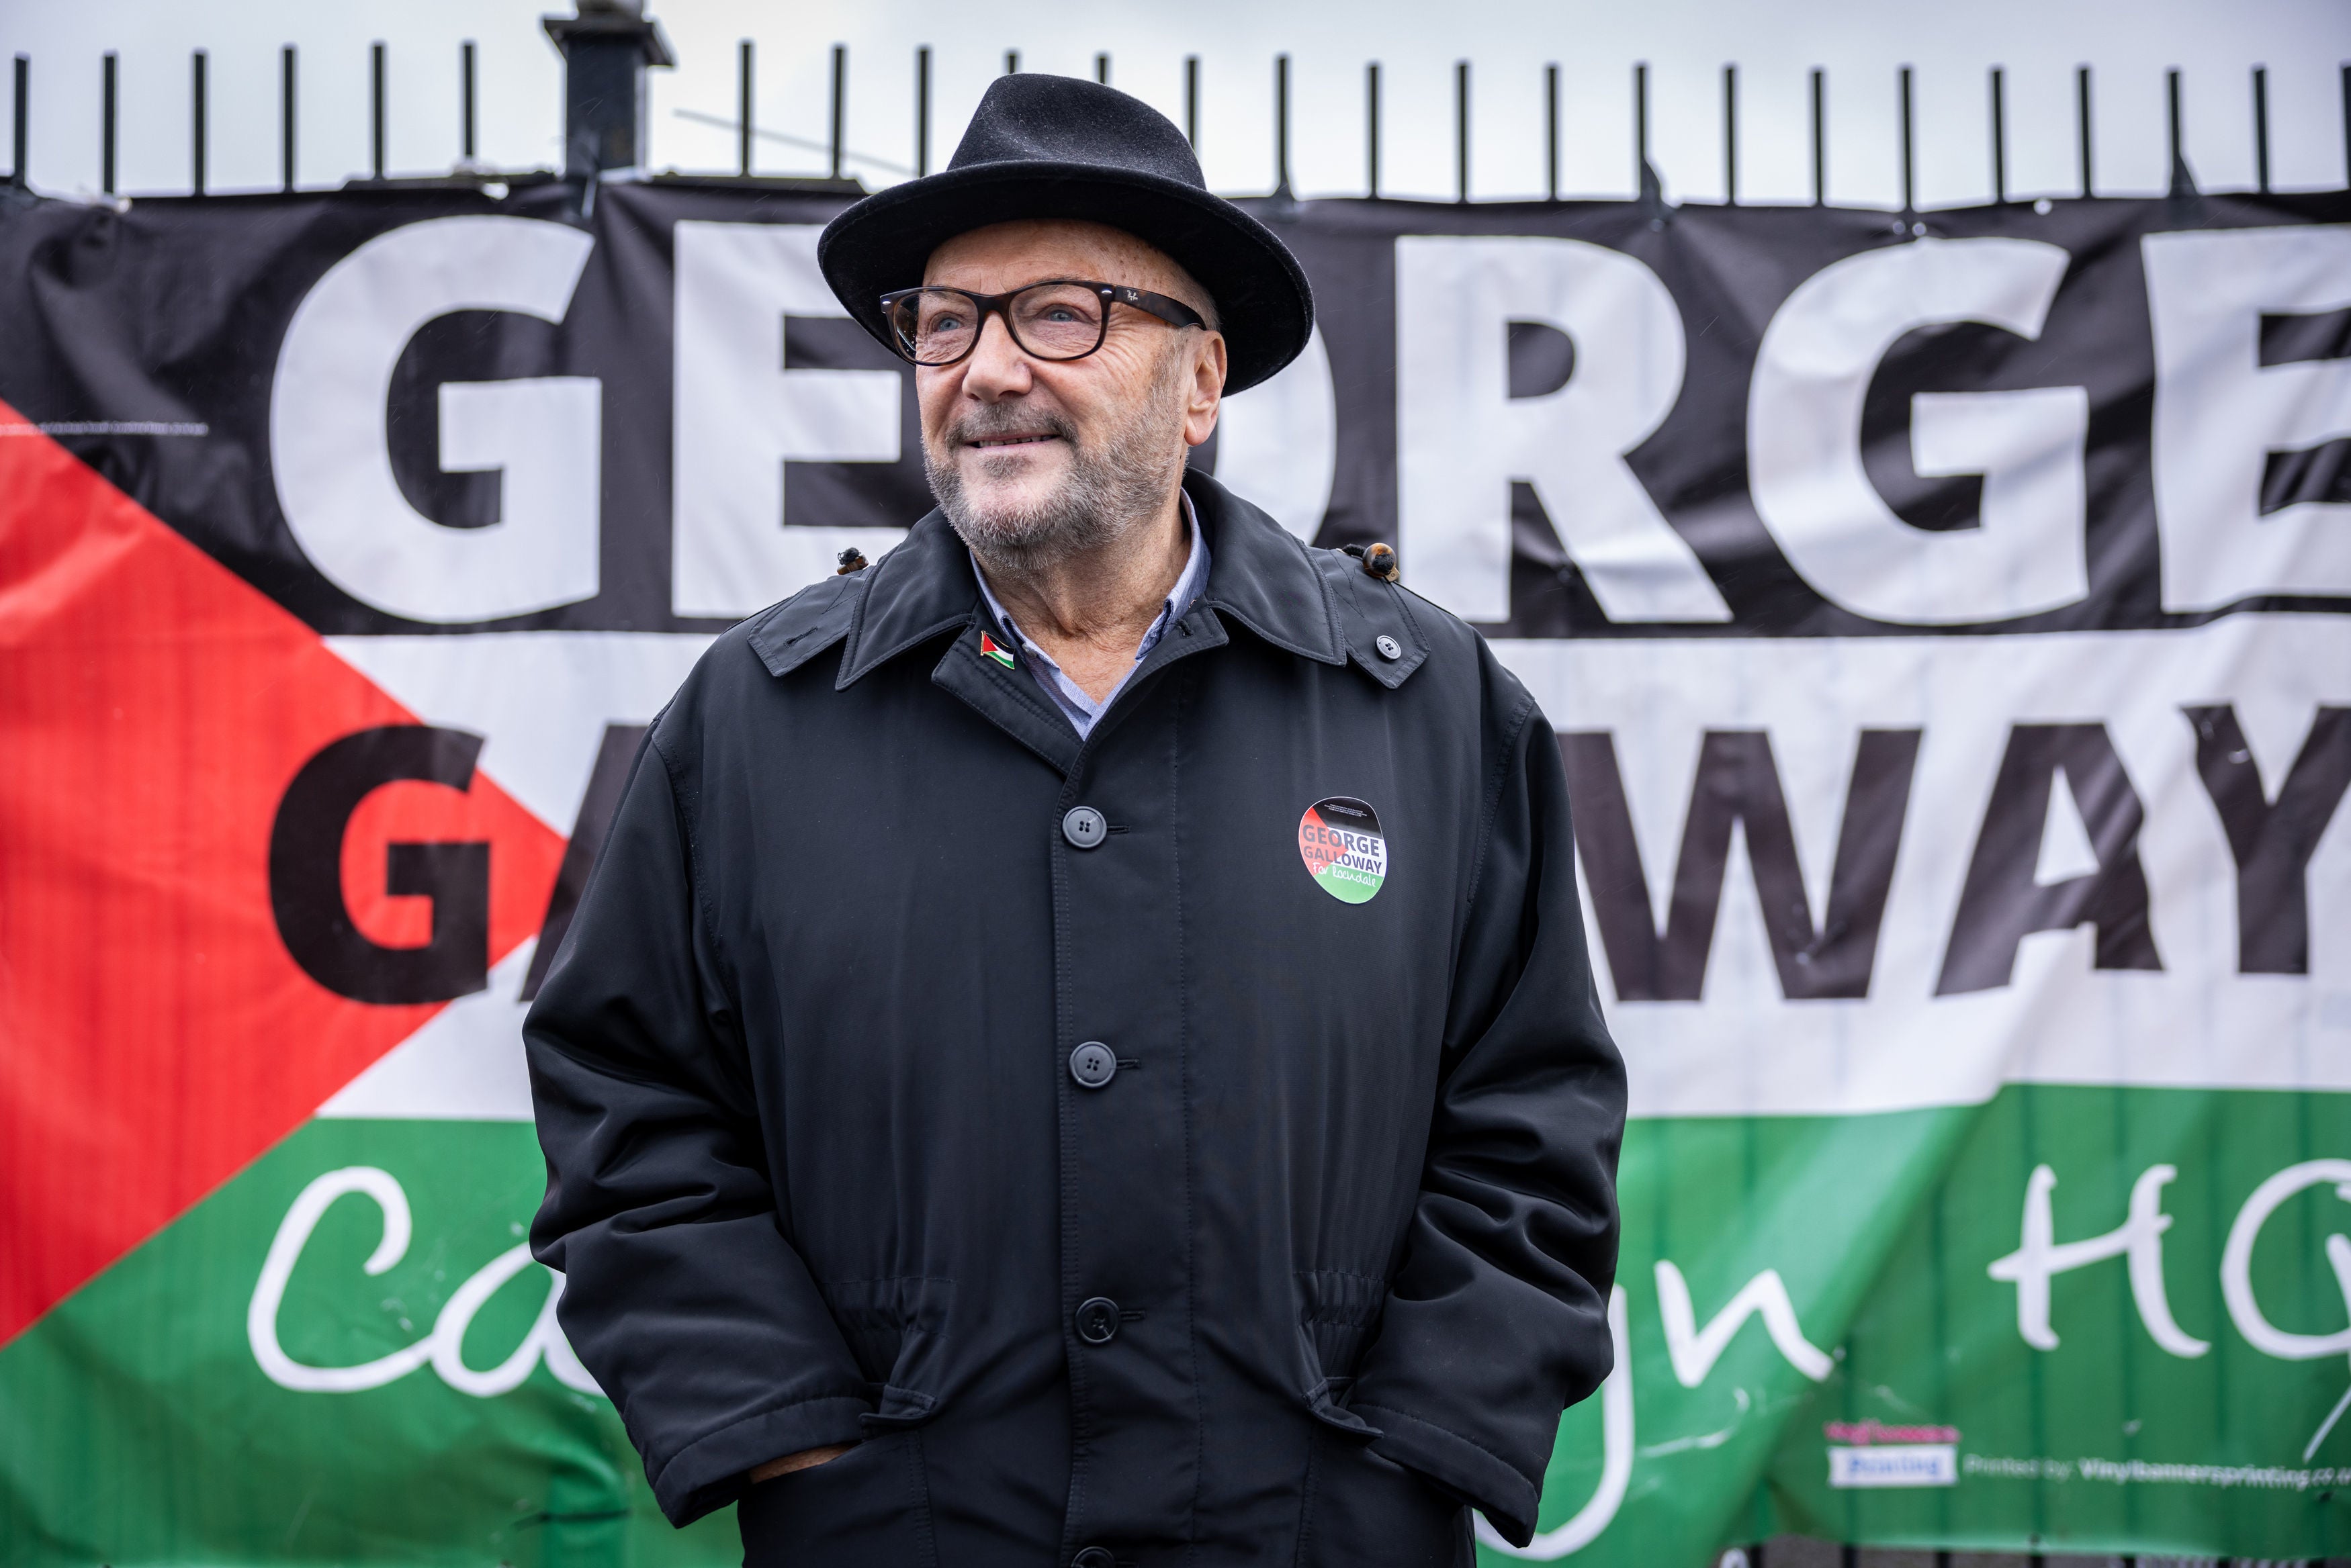 The front runner to win, George Galloway, is one of the most divisive figures in British politics